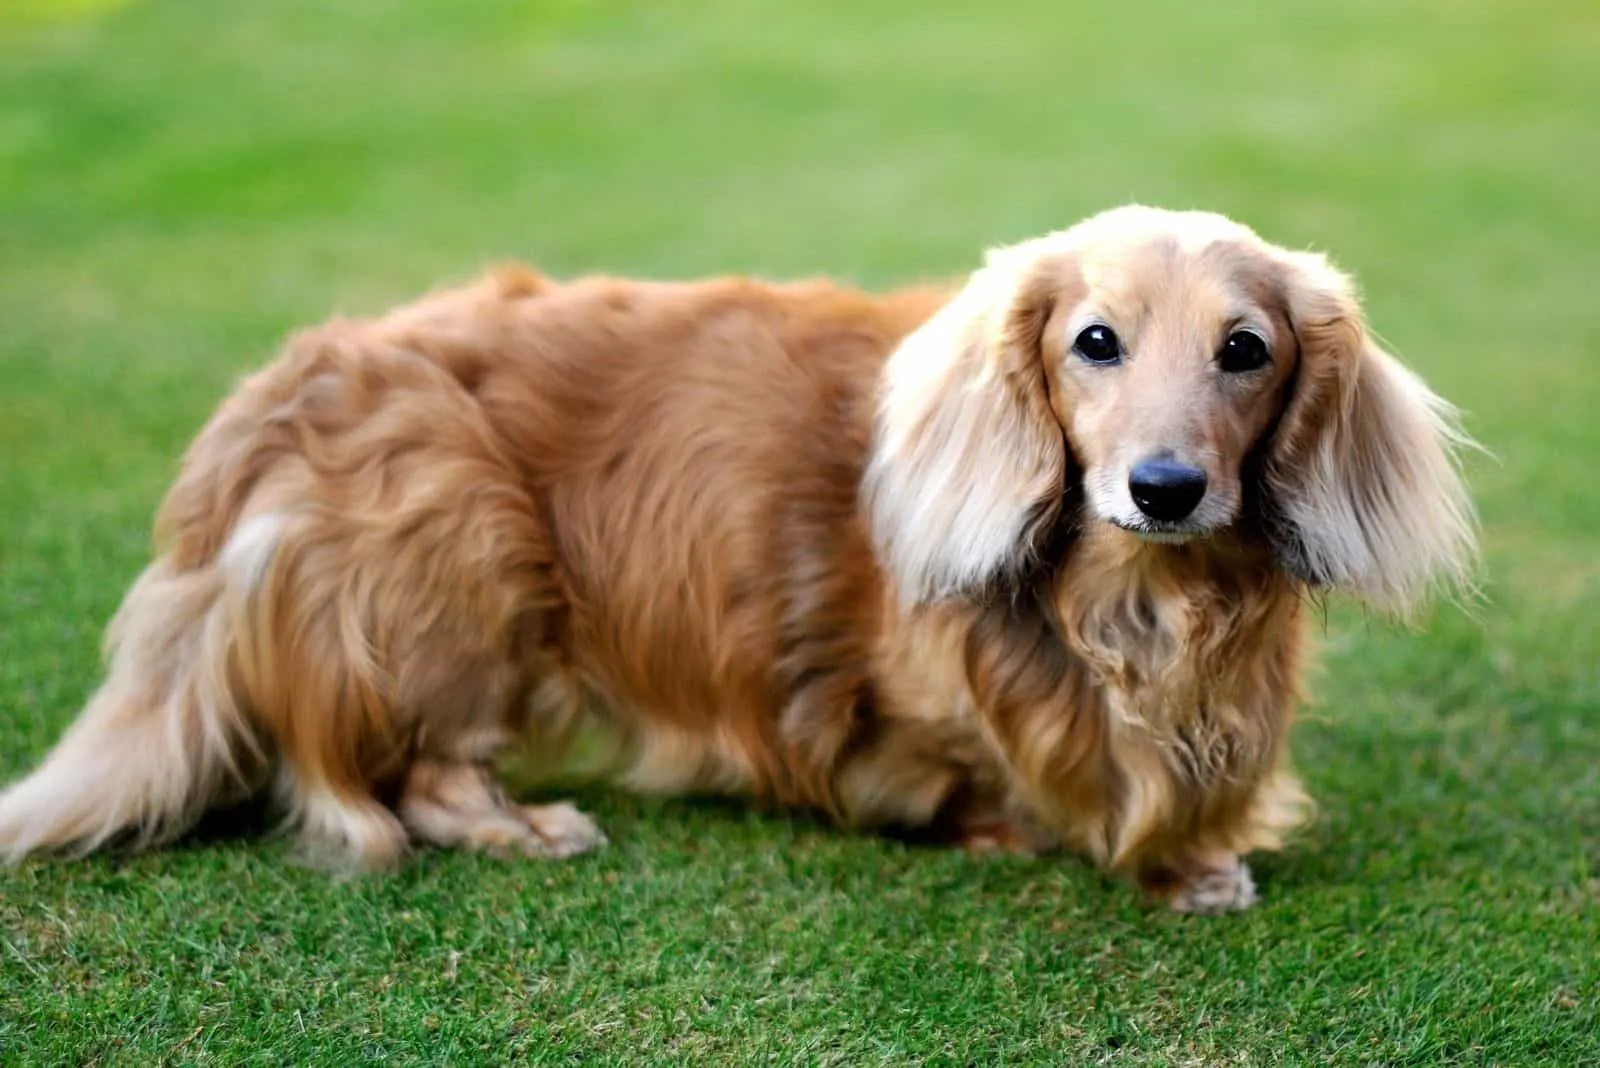 dachshund dog breed also known as the wiener dog or sausage dog is a short-legged, long-bodied, hound-type dog breed standing outdoors